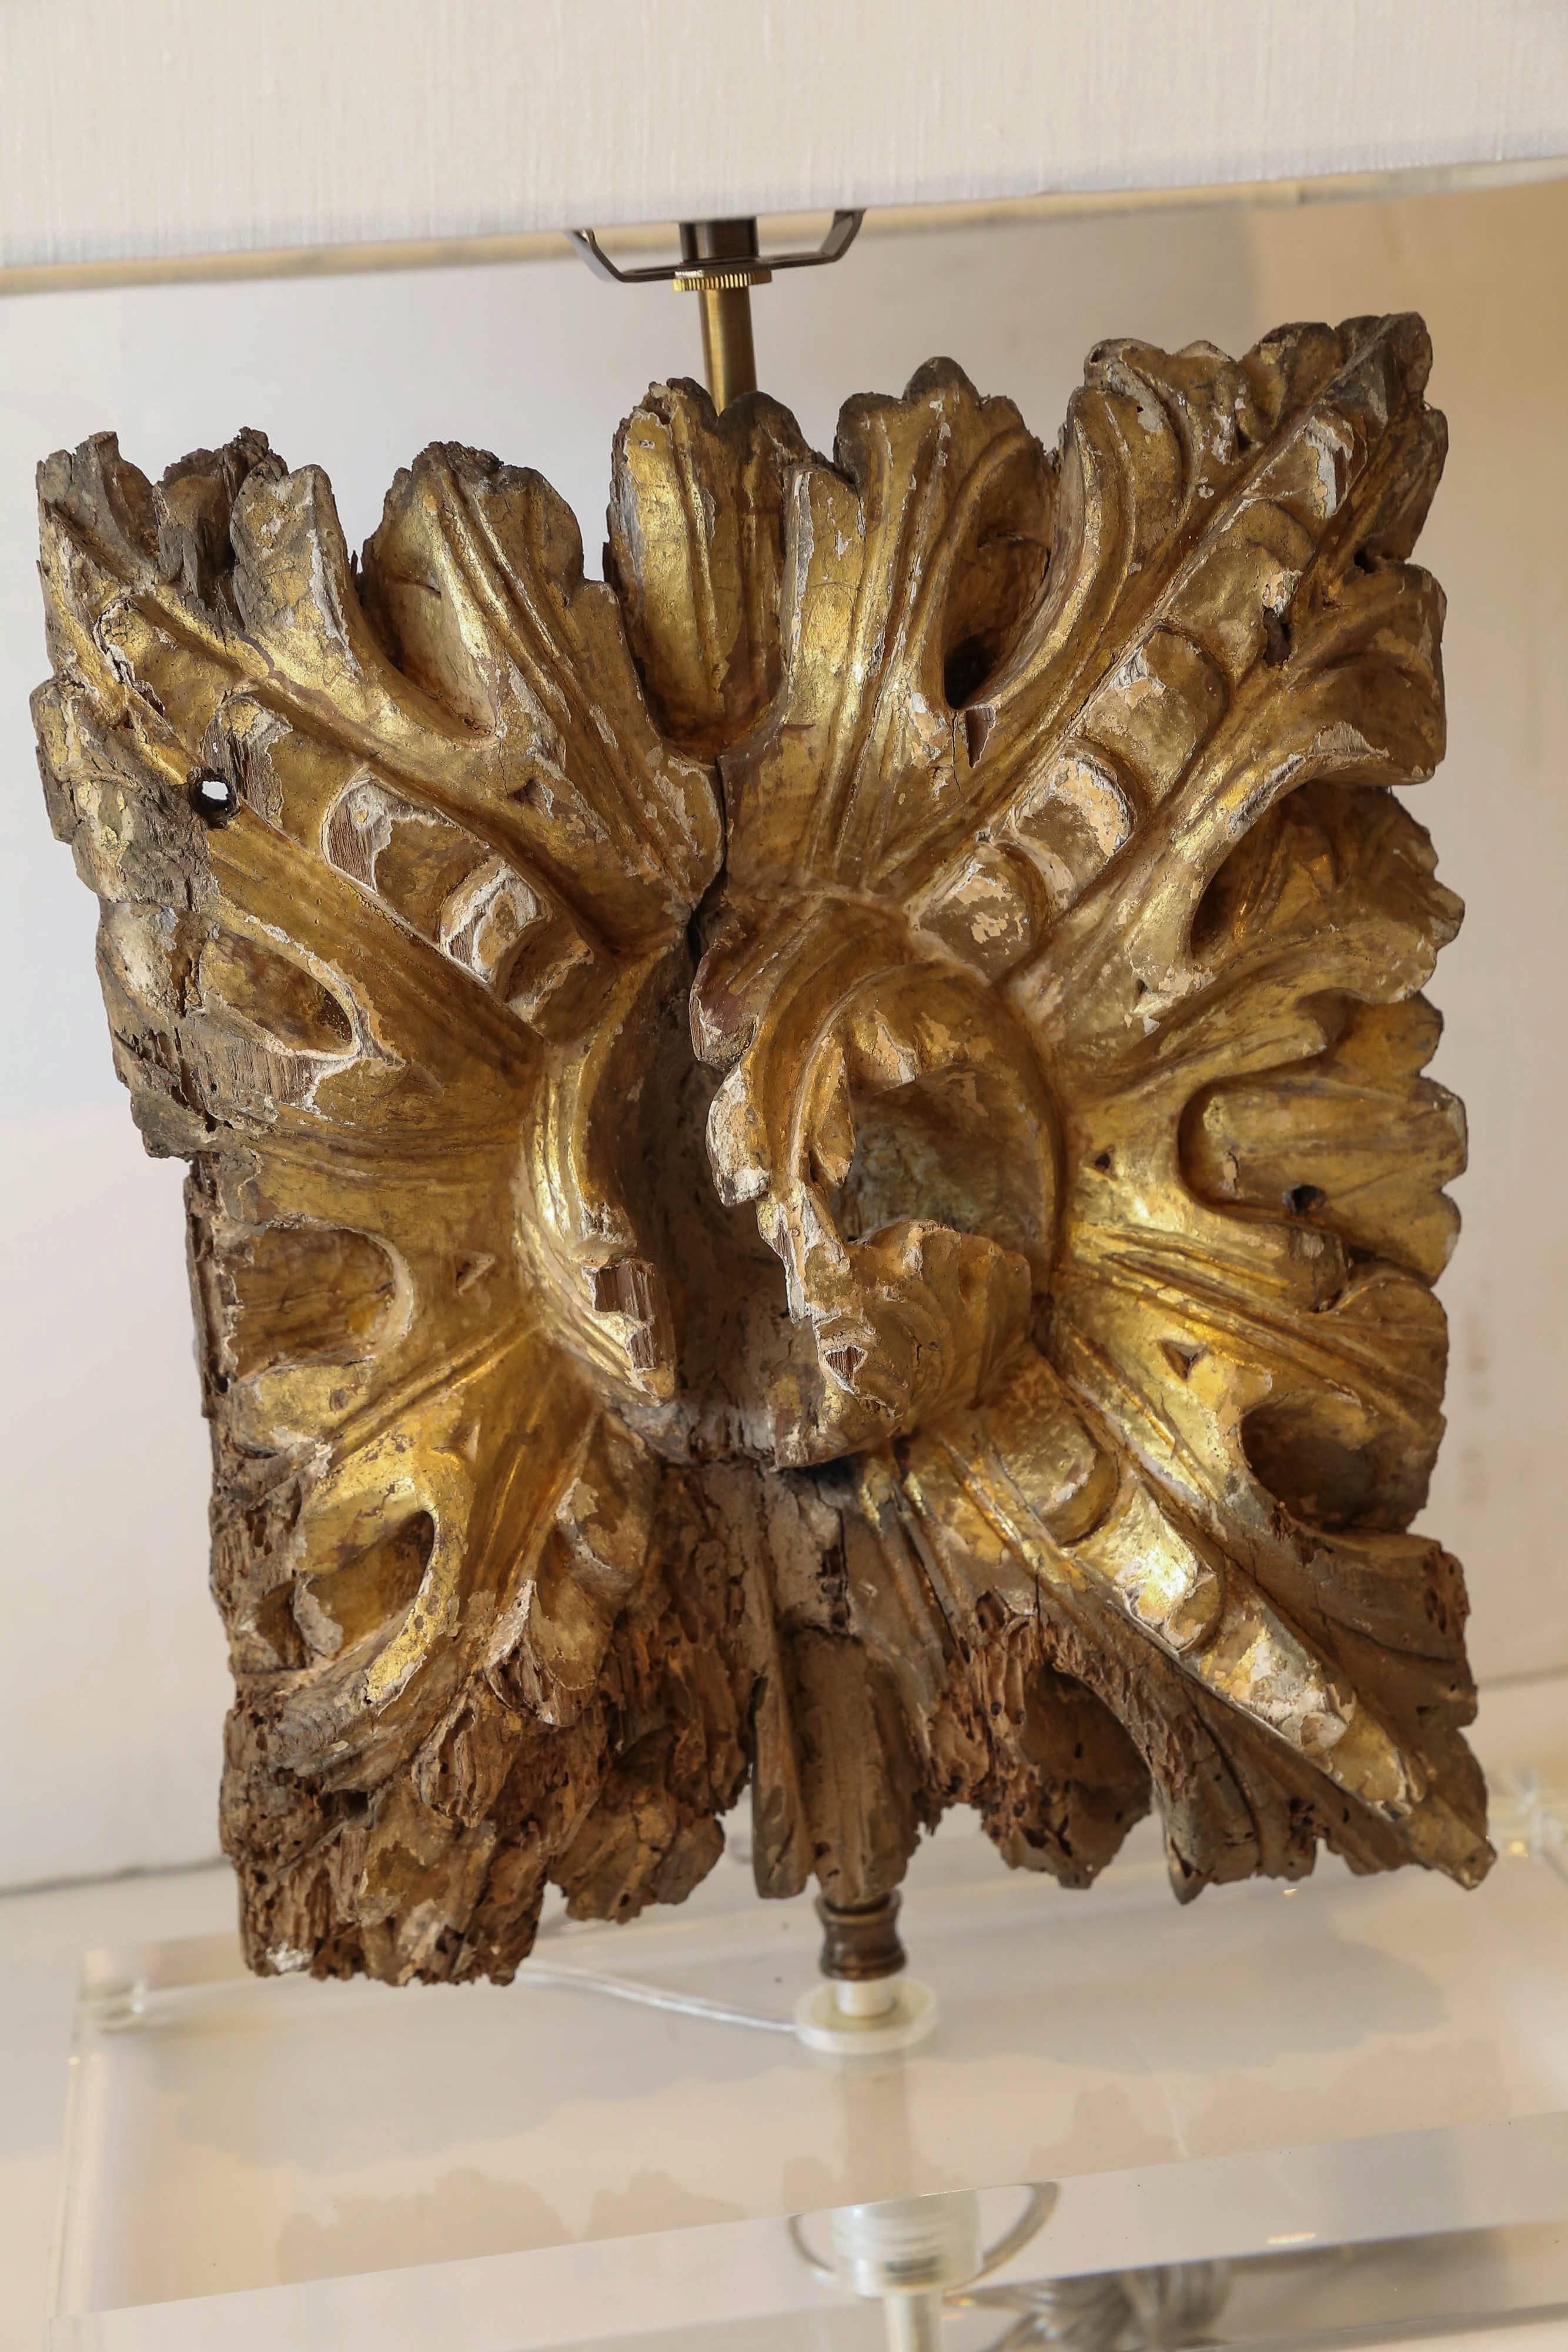 18th century gilded architectural fragment mounted on a Lucite base and newly-wired as a custom table lamp. Sold with a complementary linen shade (measurements include shade).